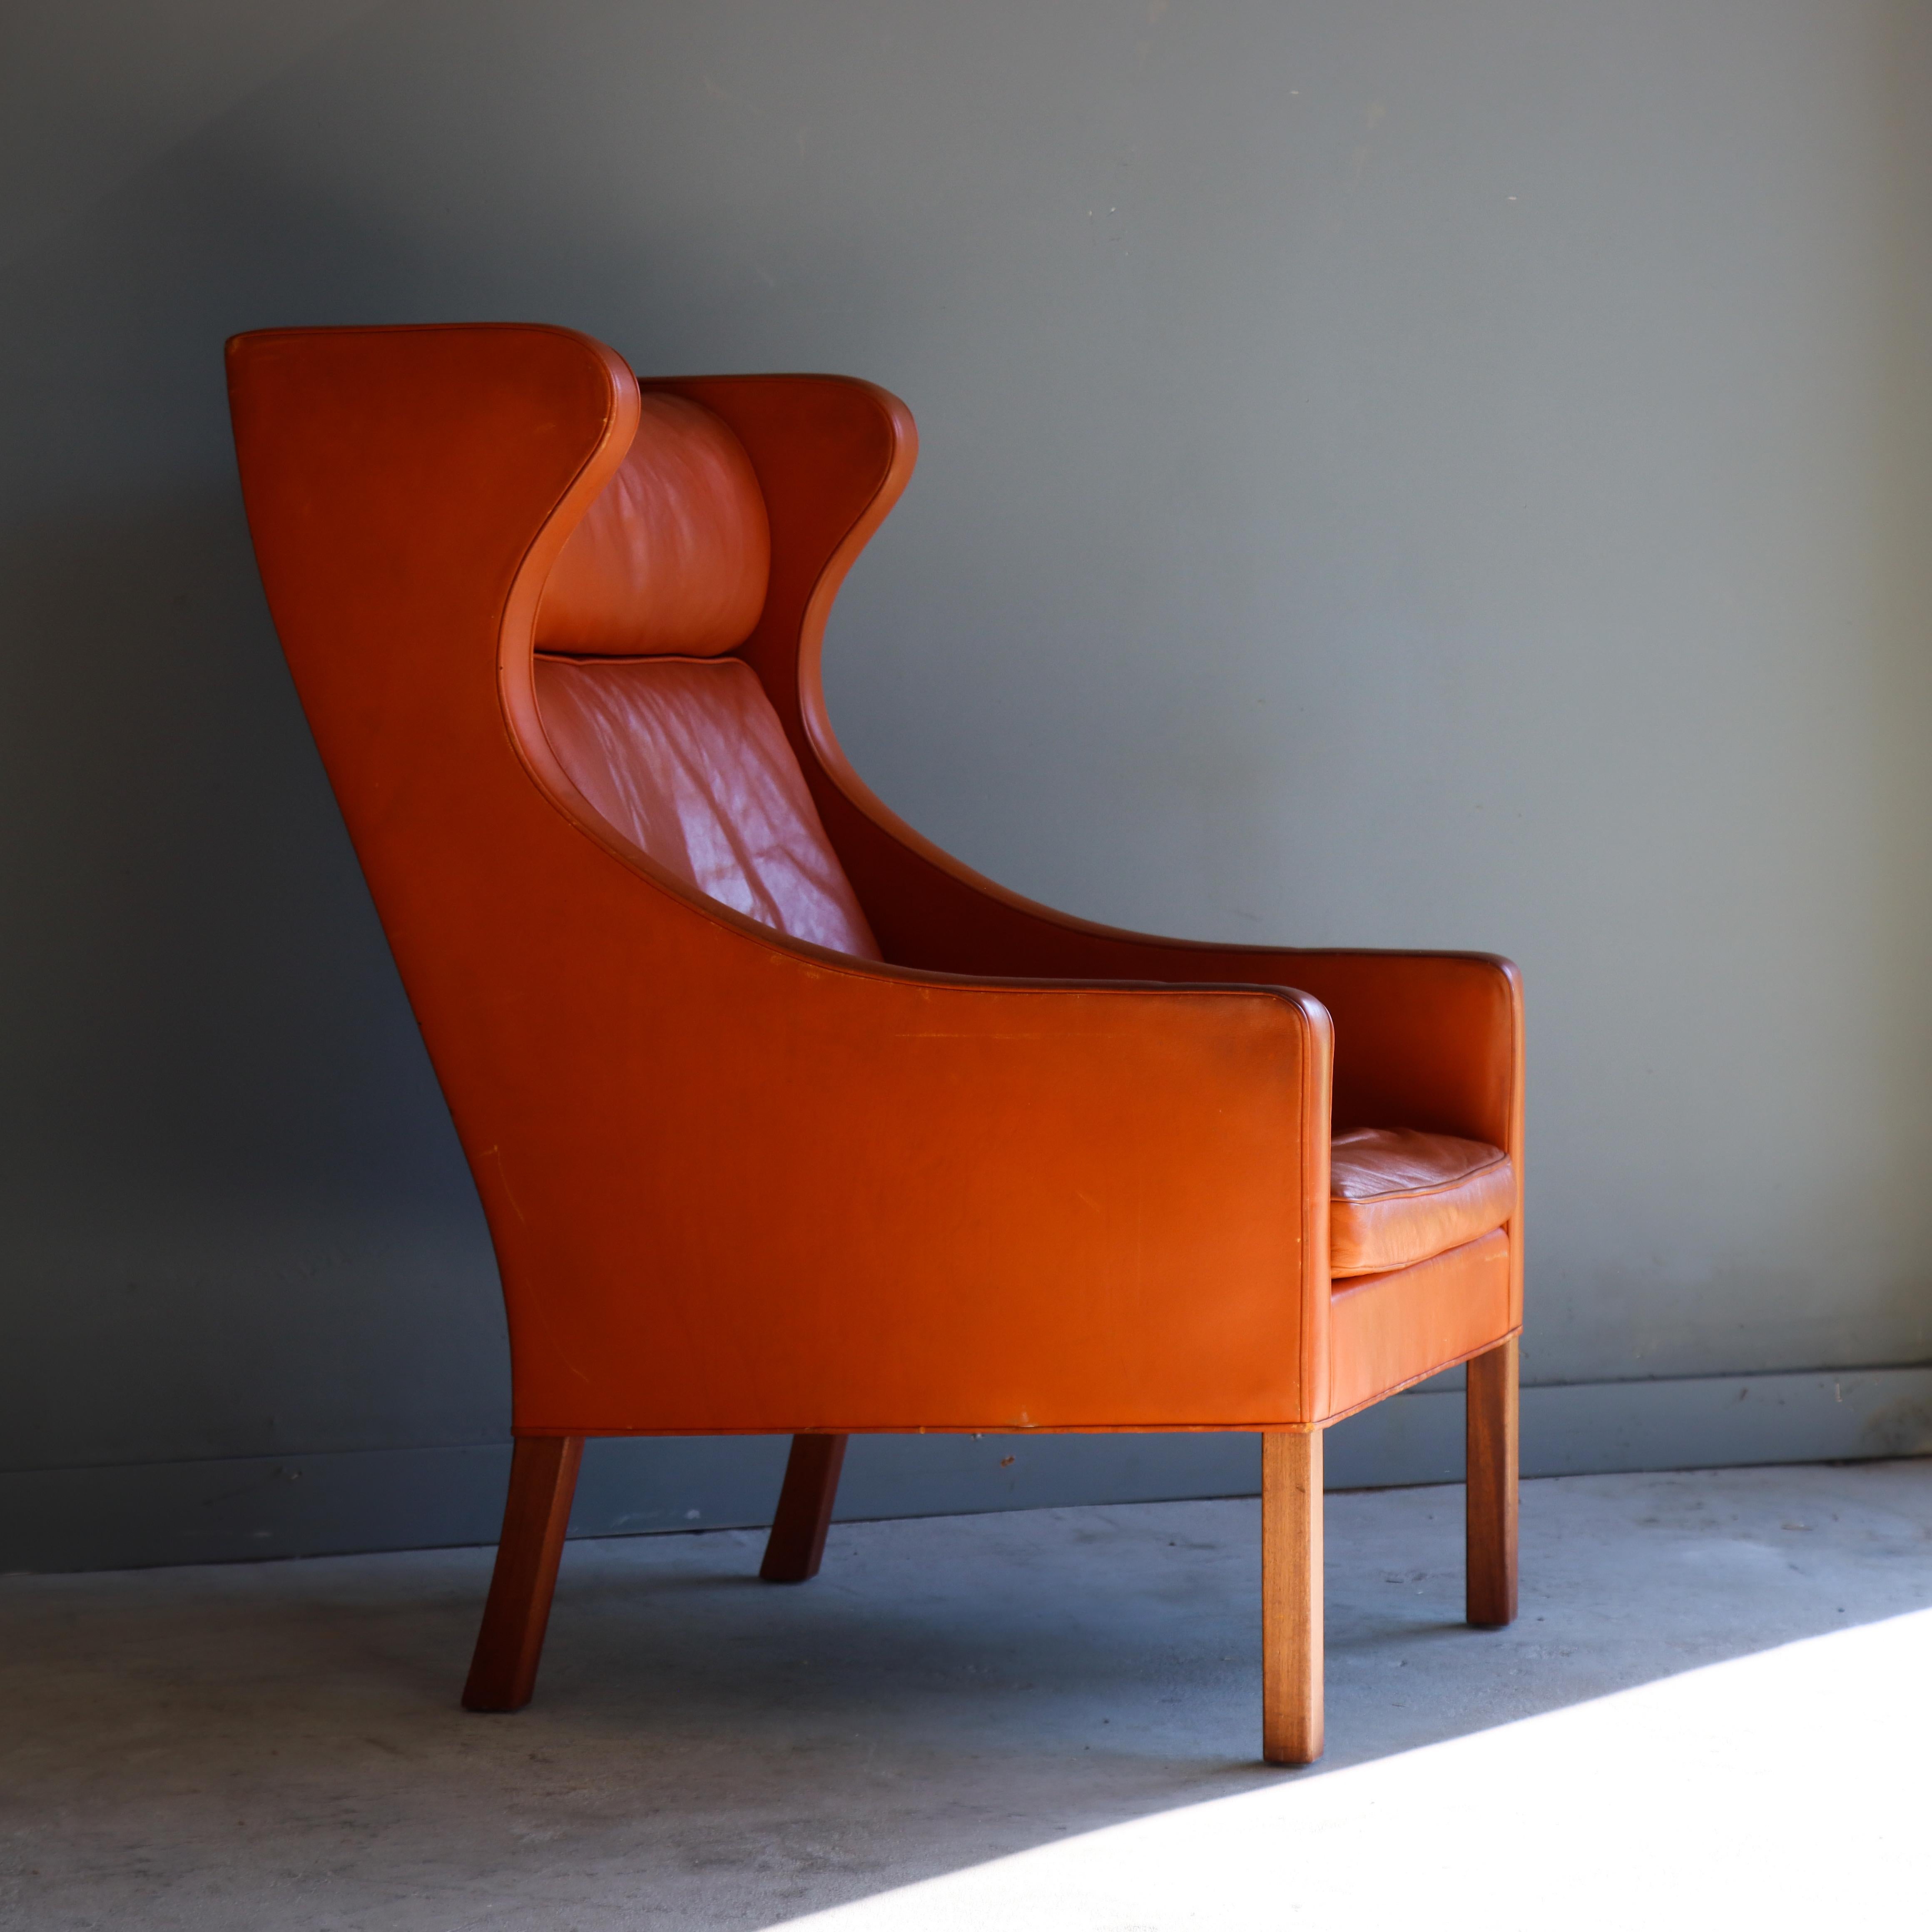 Highback wingchair designed by Borge Mogensen, and manufactured by Fredericia in Denmark, circa 1960.

TOne of Mogensen’s most notable designs, its high quality original leather and sharp lines make this a classic that blends with just about any